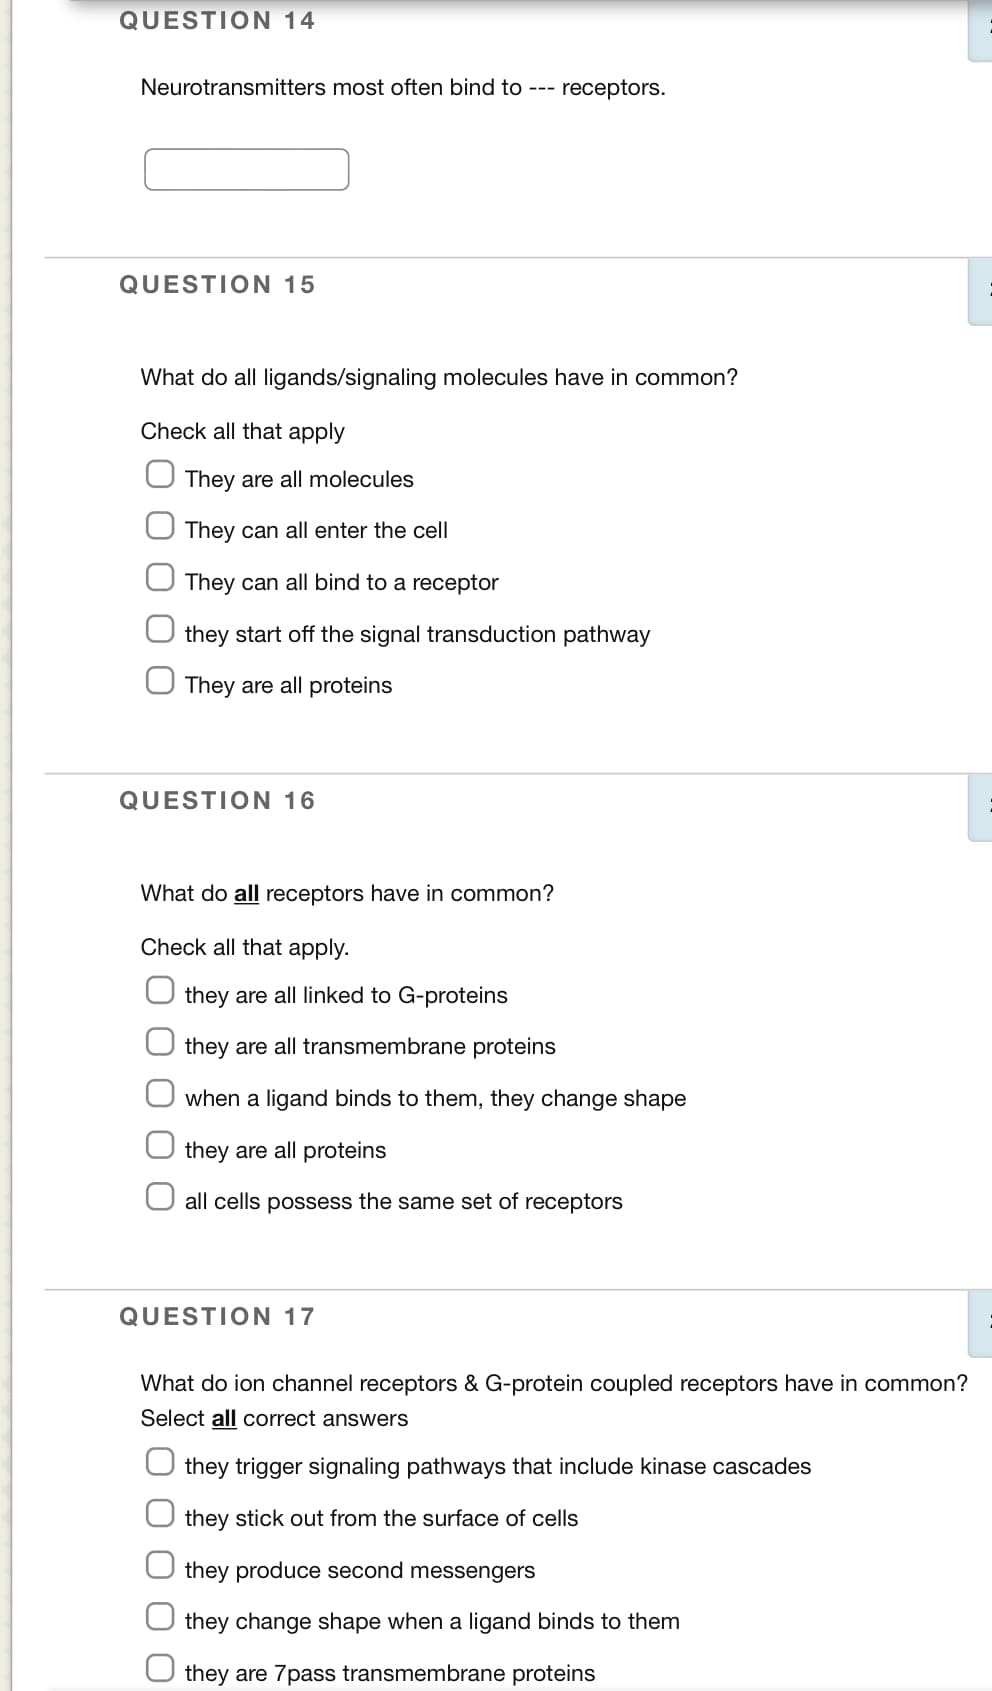 QUESTION 14
Neurotransmitters most often bind to ---
receptors.
QUESTION 15
What do all ligands/signaling molecules have in common?
Check all that apply
They are all molecules
They can all enter the cell
They can all bind to a receptor
they start off the signal transduction pathway
They are all proteins
QUESTION 16
What do all receptors have in common?
Check all that apply.
they are all linked to G-proteins
they are all transmembrane proteins
when a ligand binds to them, they change shape
they are all proteins
all cells possess the same set of receptors
QUESTION 17
What do ion channel receptors & G-protein coupled receptors have in common?
Select all correct answers
they trigger signaling pathways that include kinase cascades
they stick out from the surface of cells
they produce second messengers
they change shape when a ligand binds to them
they are 7pass transmembrane proteins
